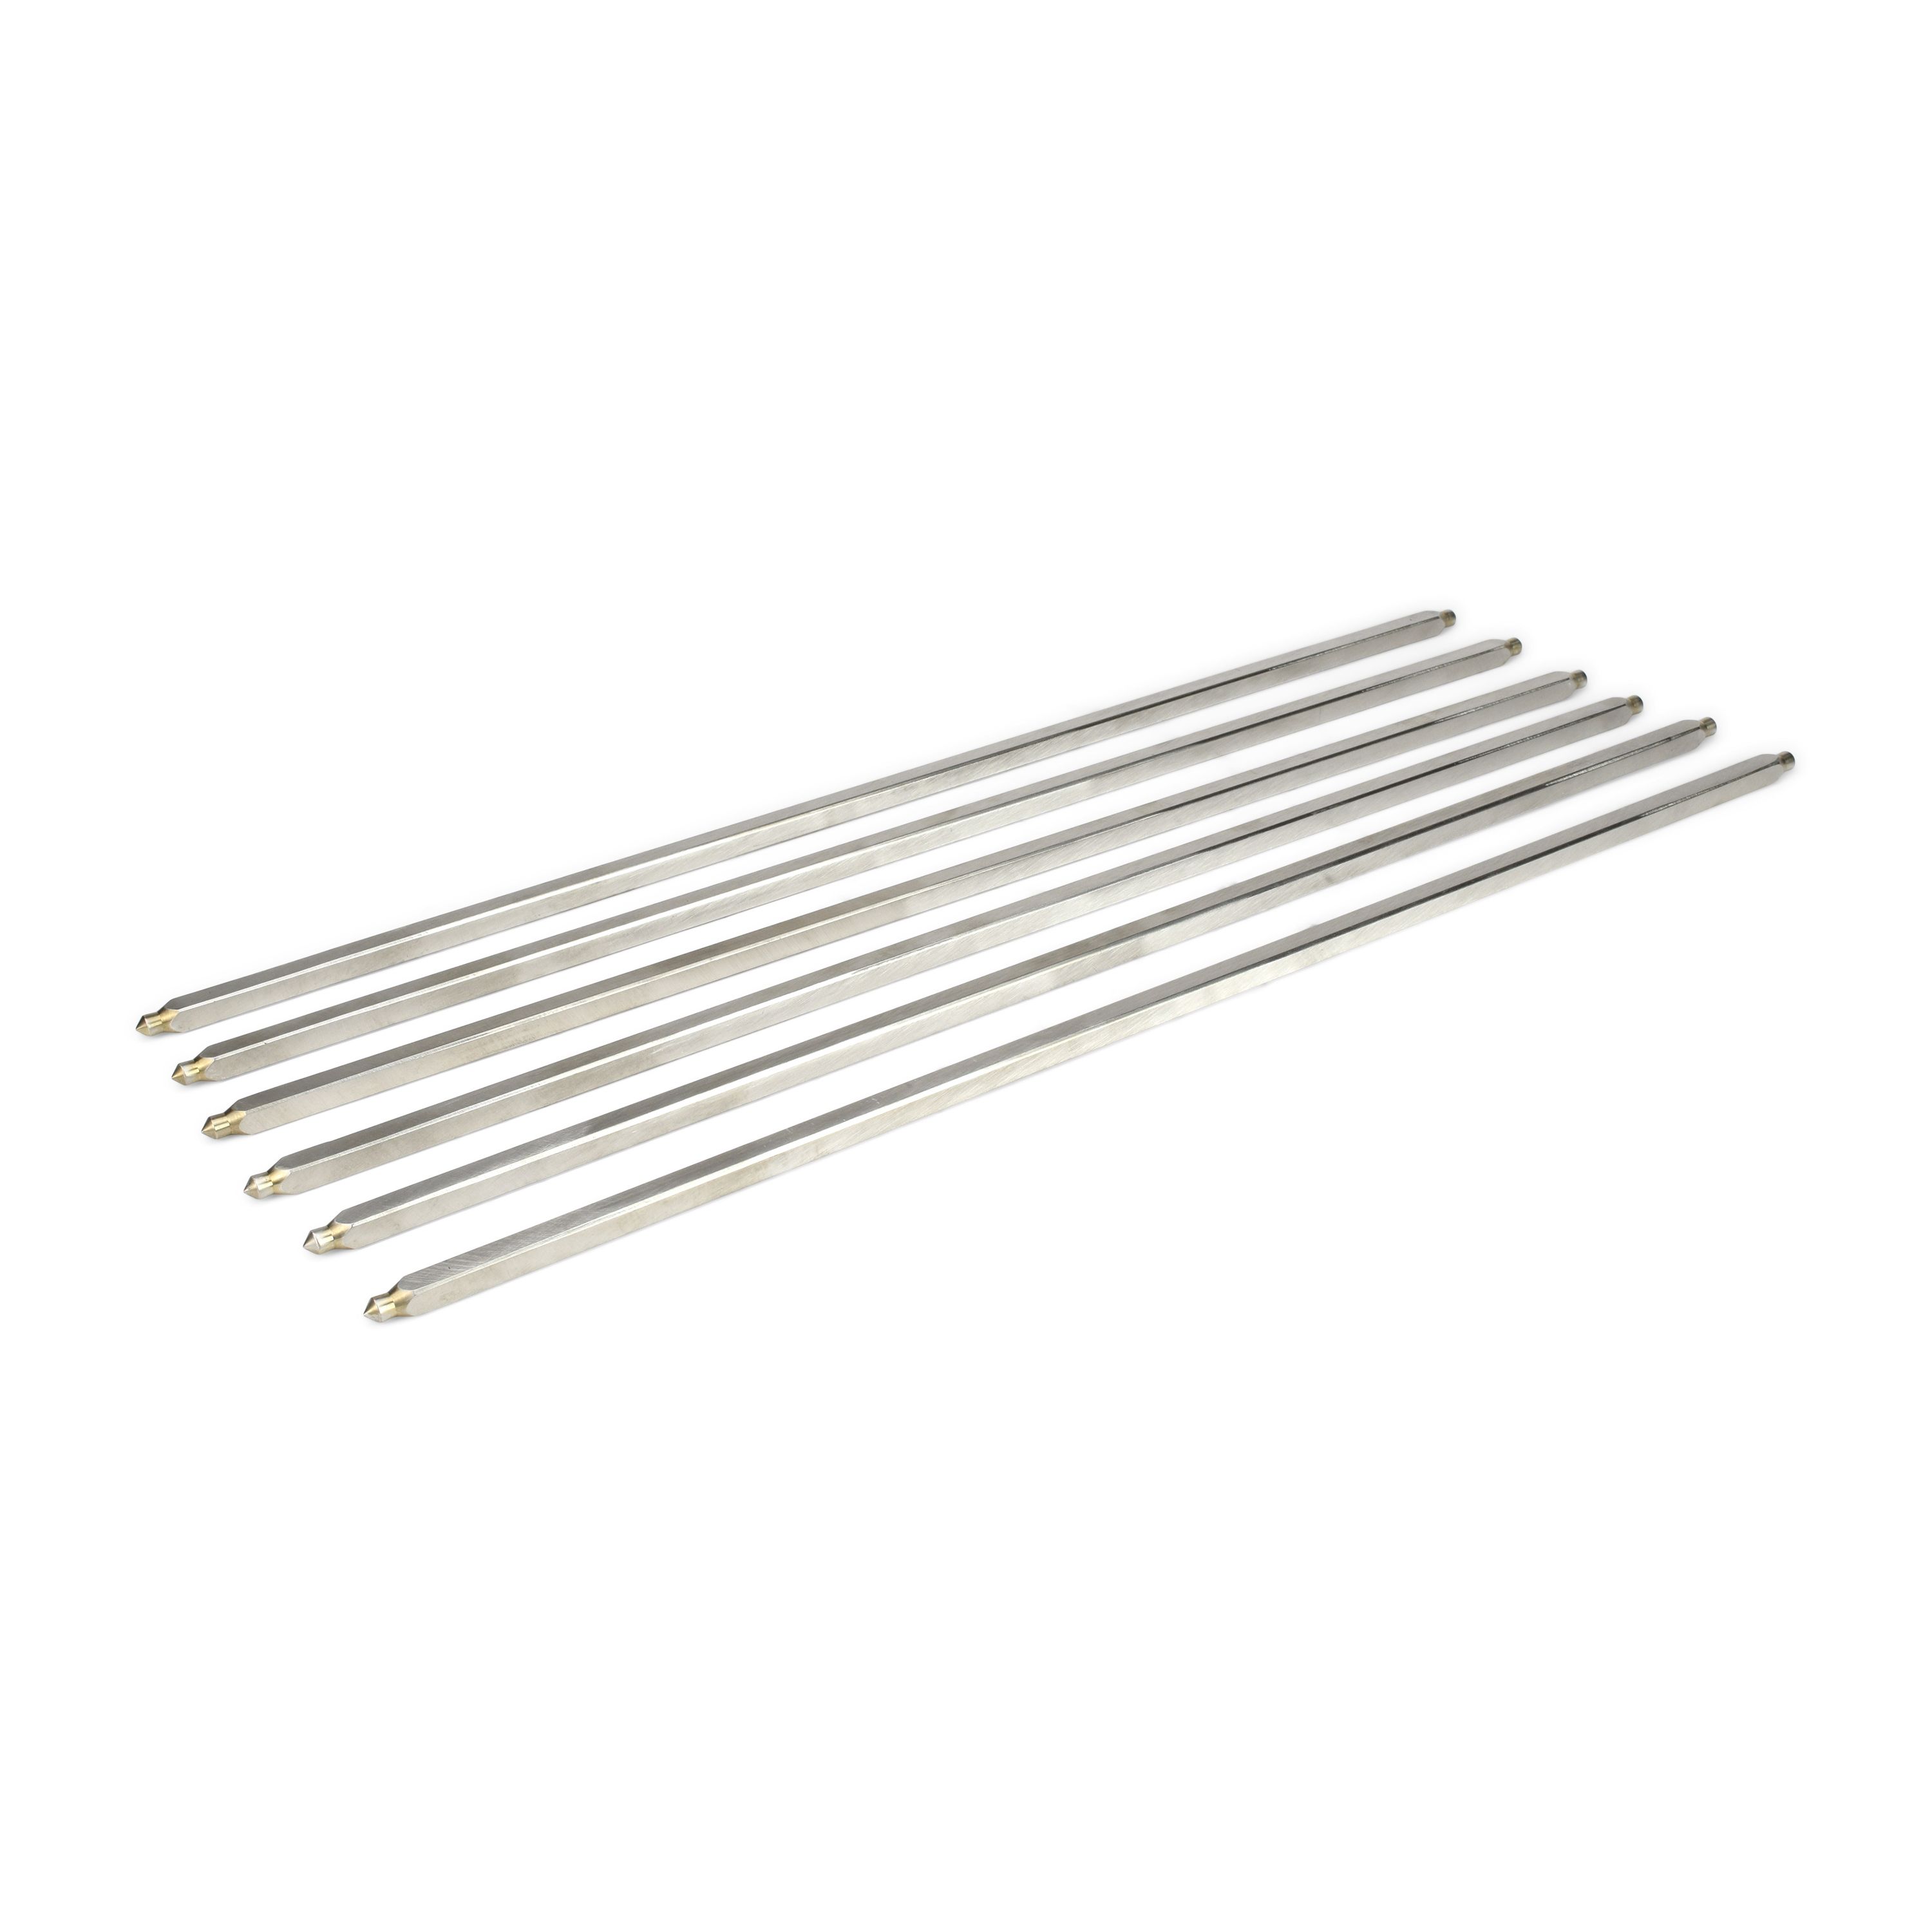 6 pieces replacement skewers stainless steel for the asado holder